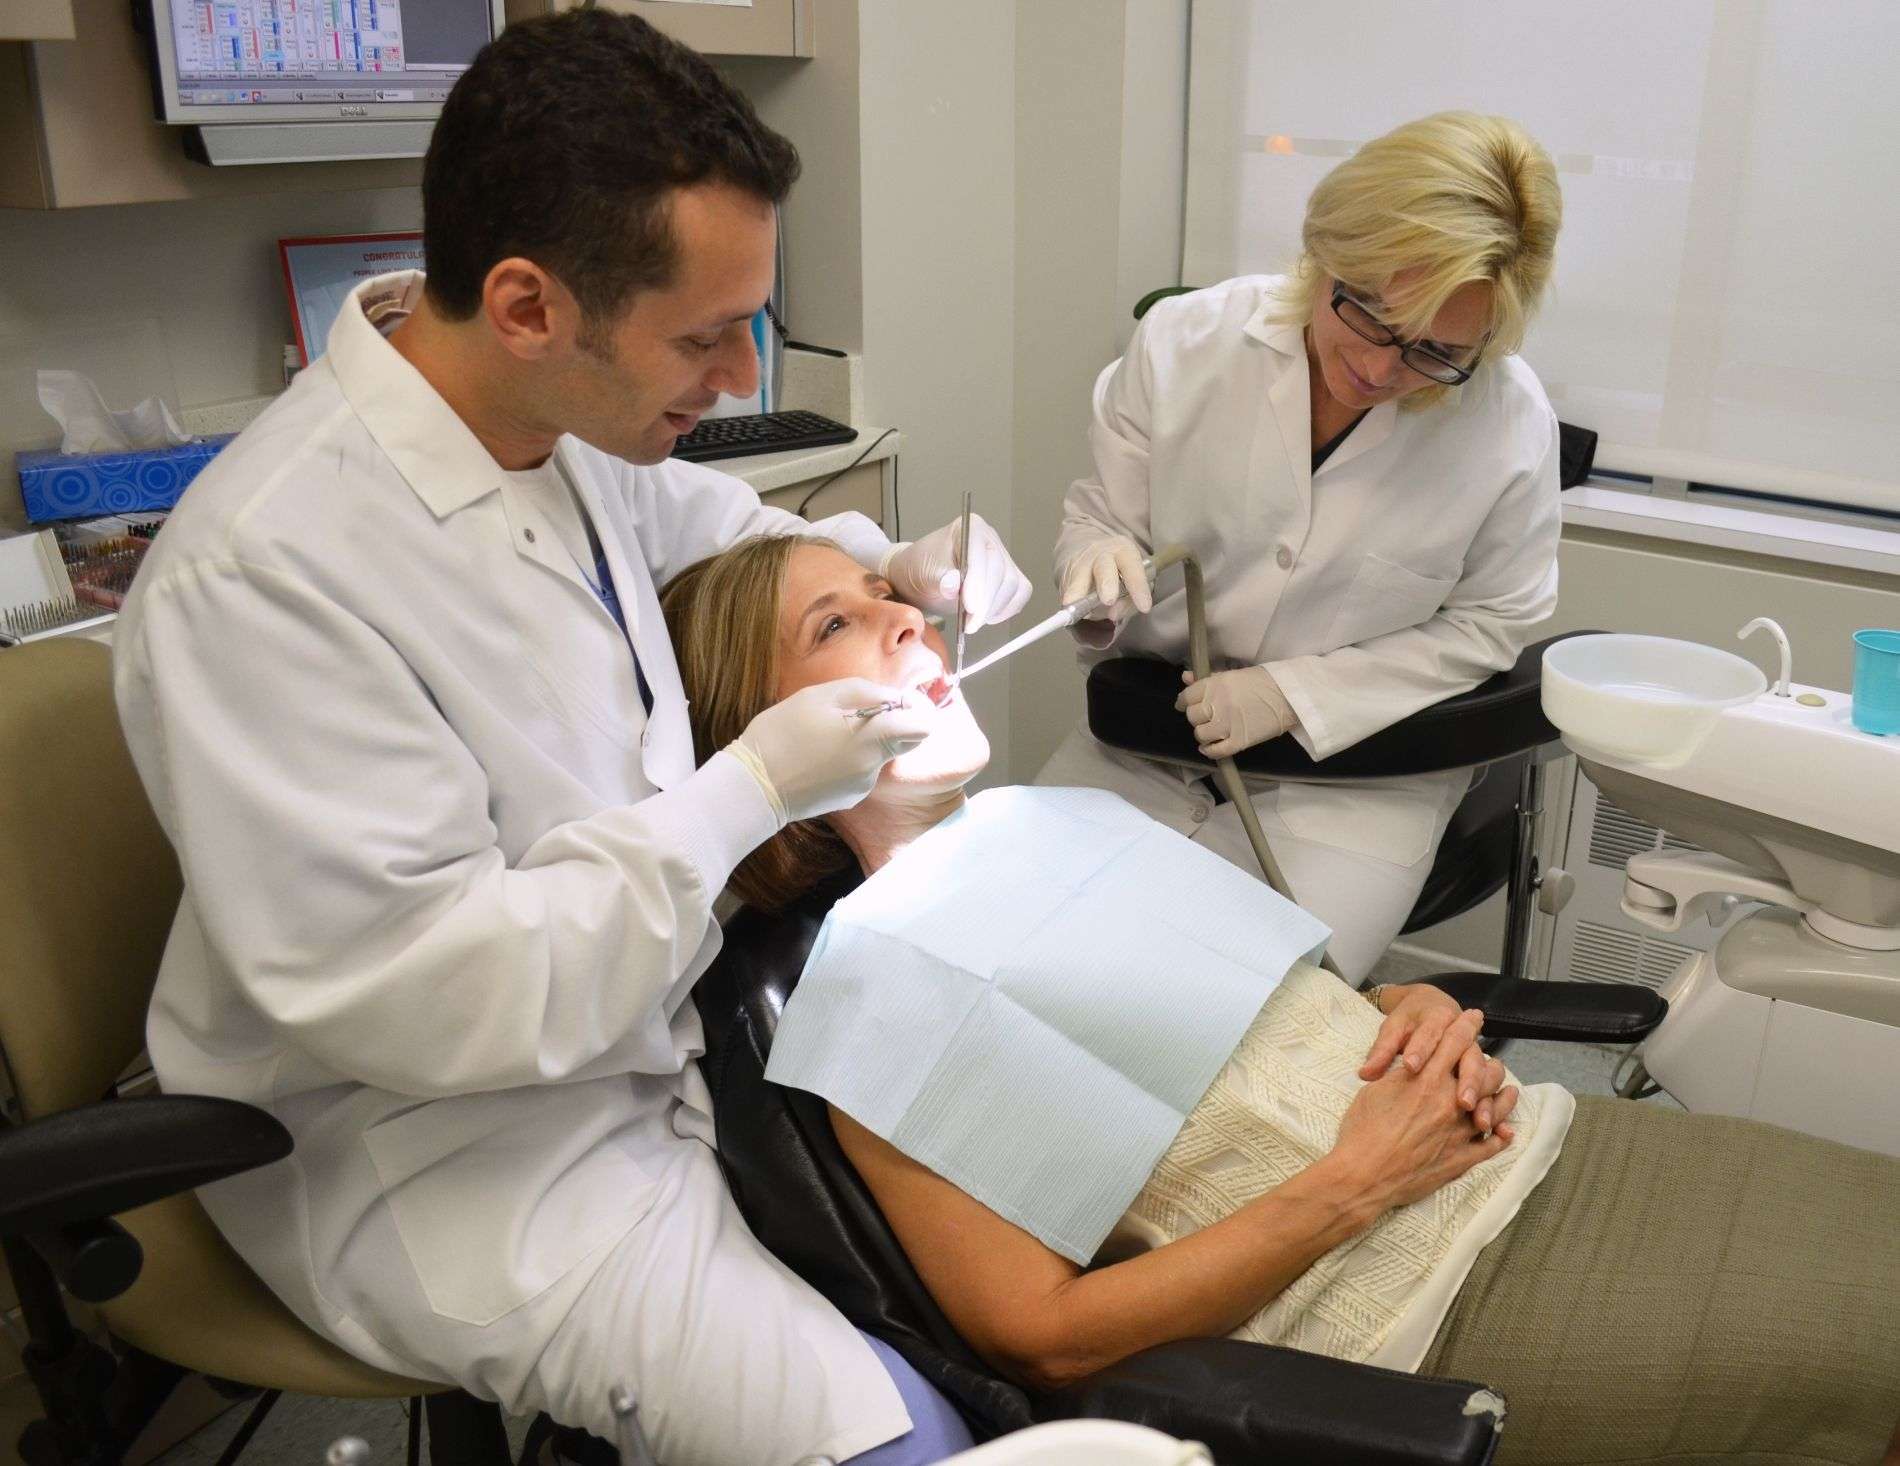 Emergency Root Canal treatment in NYC, by Emergency Endodontist